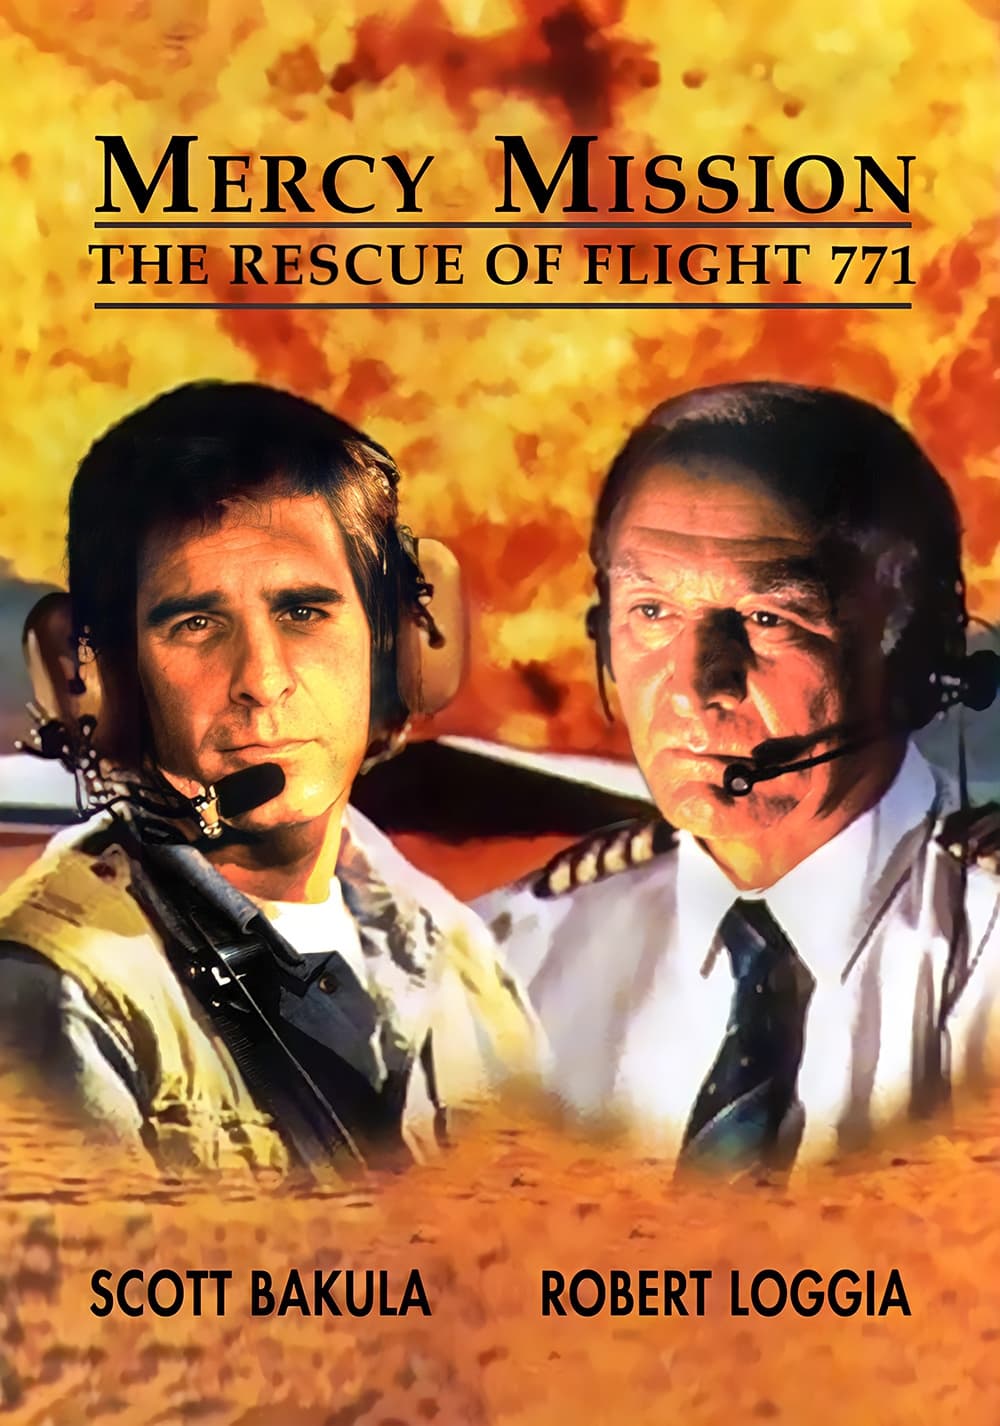 Mercy Mission: The Rescue of Flight 771 (1993)